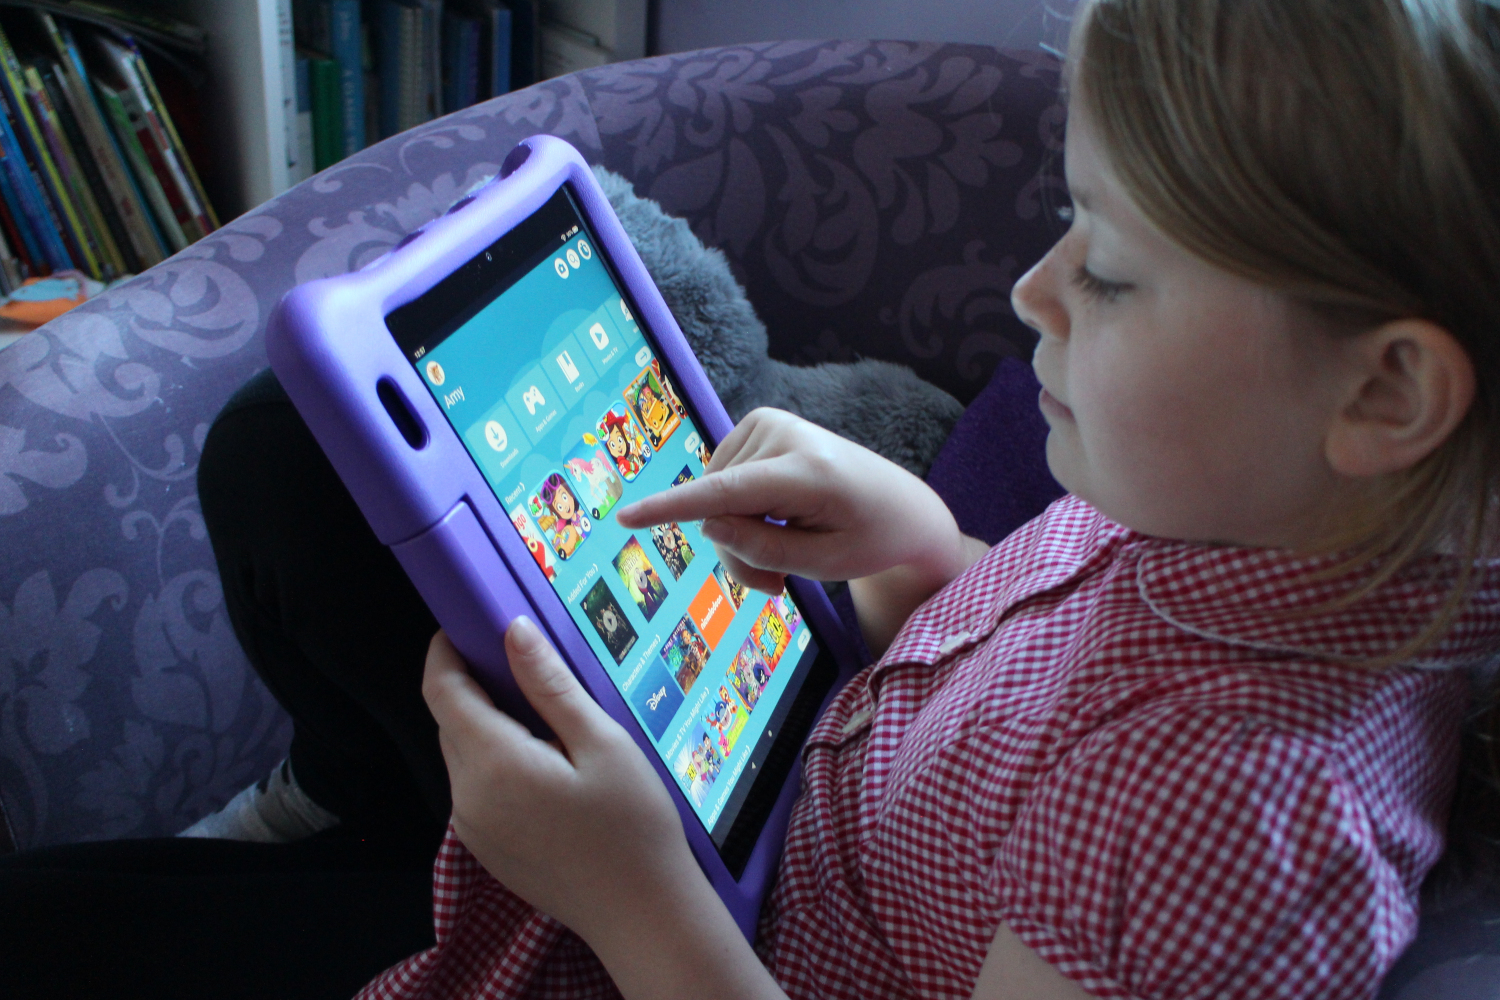 The 8 Most Indestructible and Educational Tablets for Kids in 2021